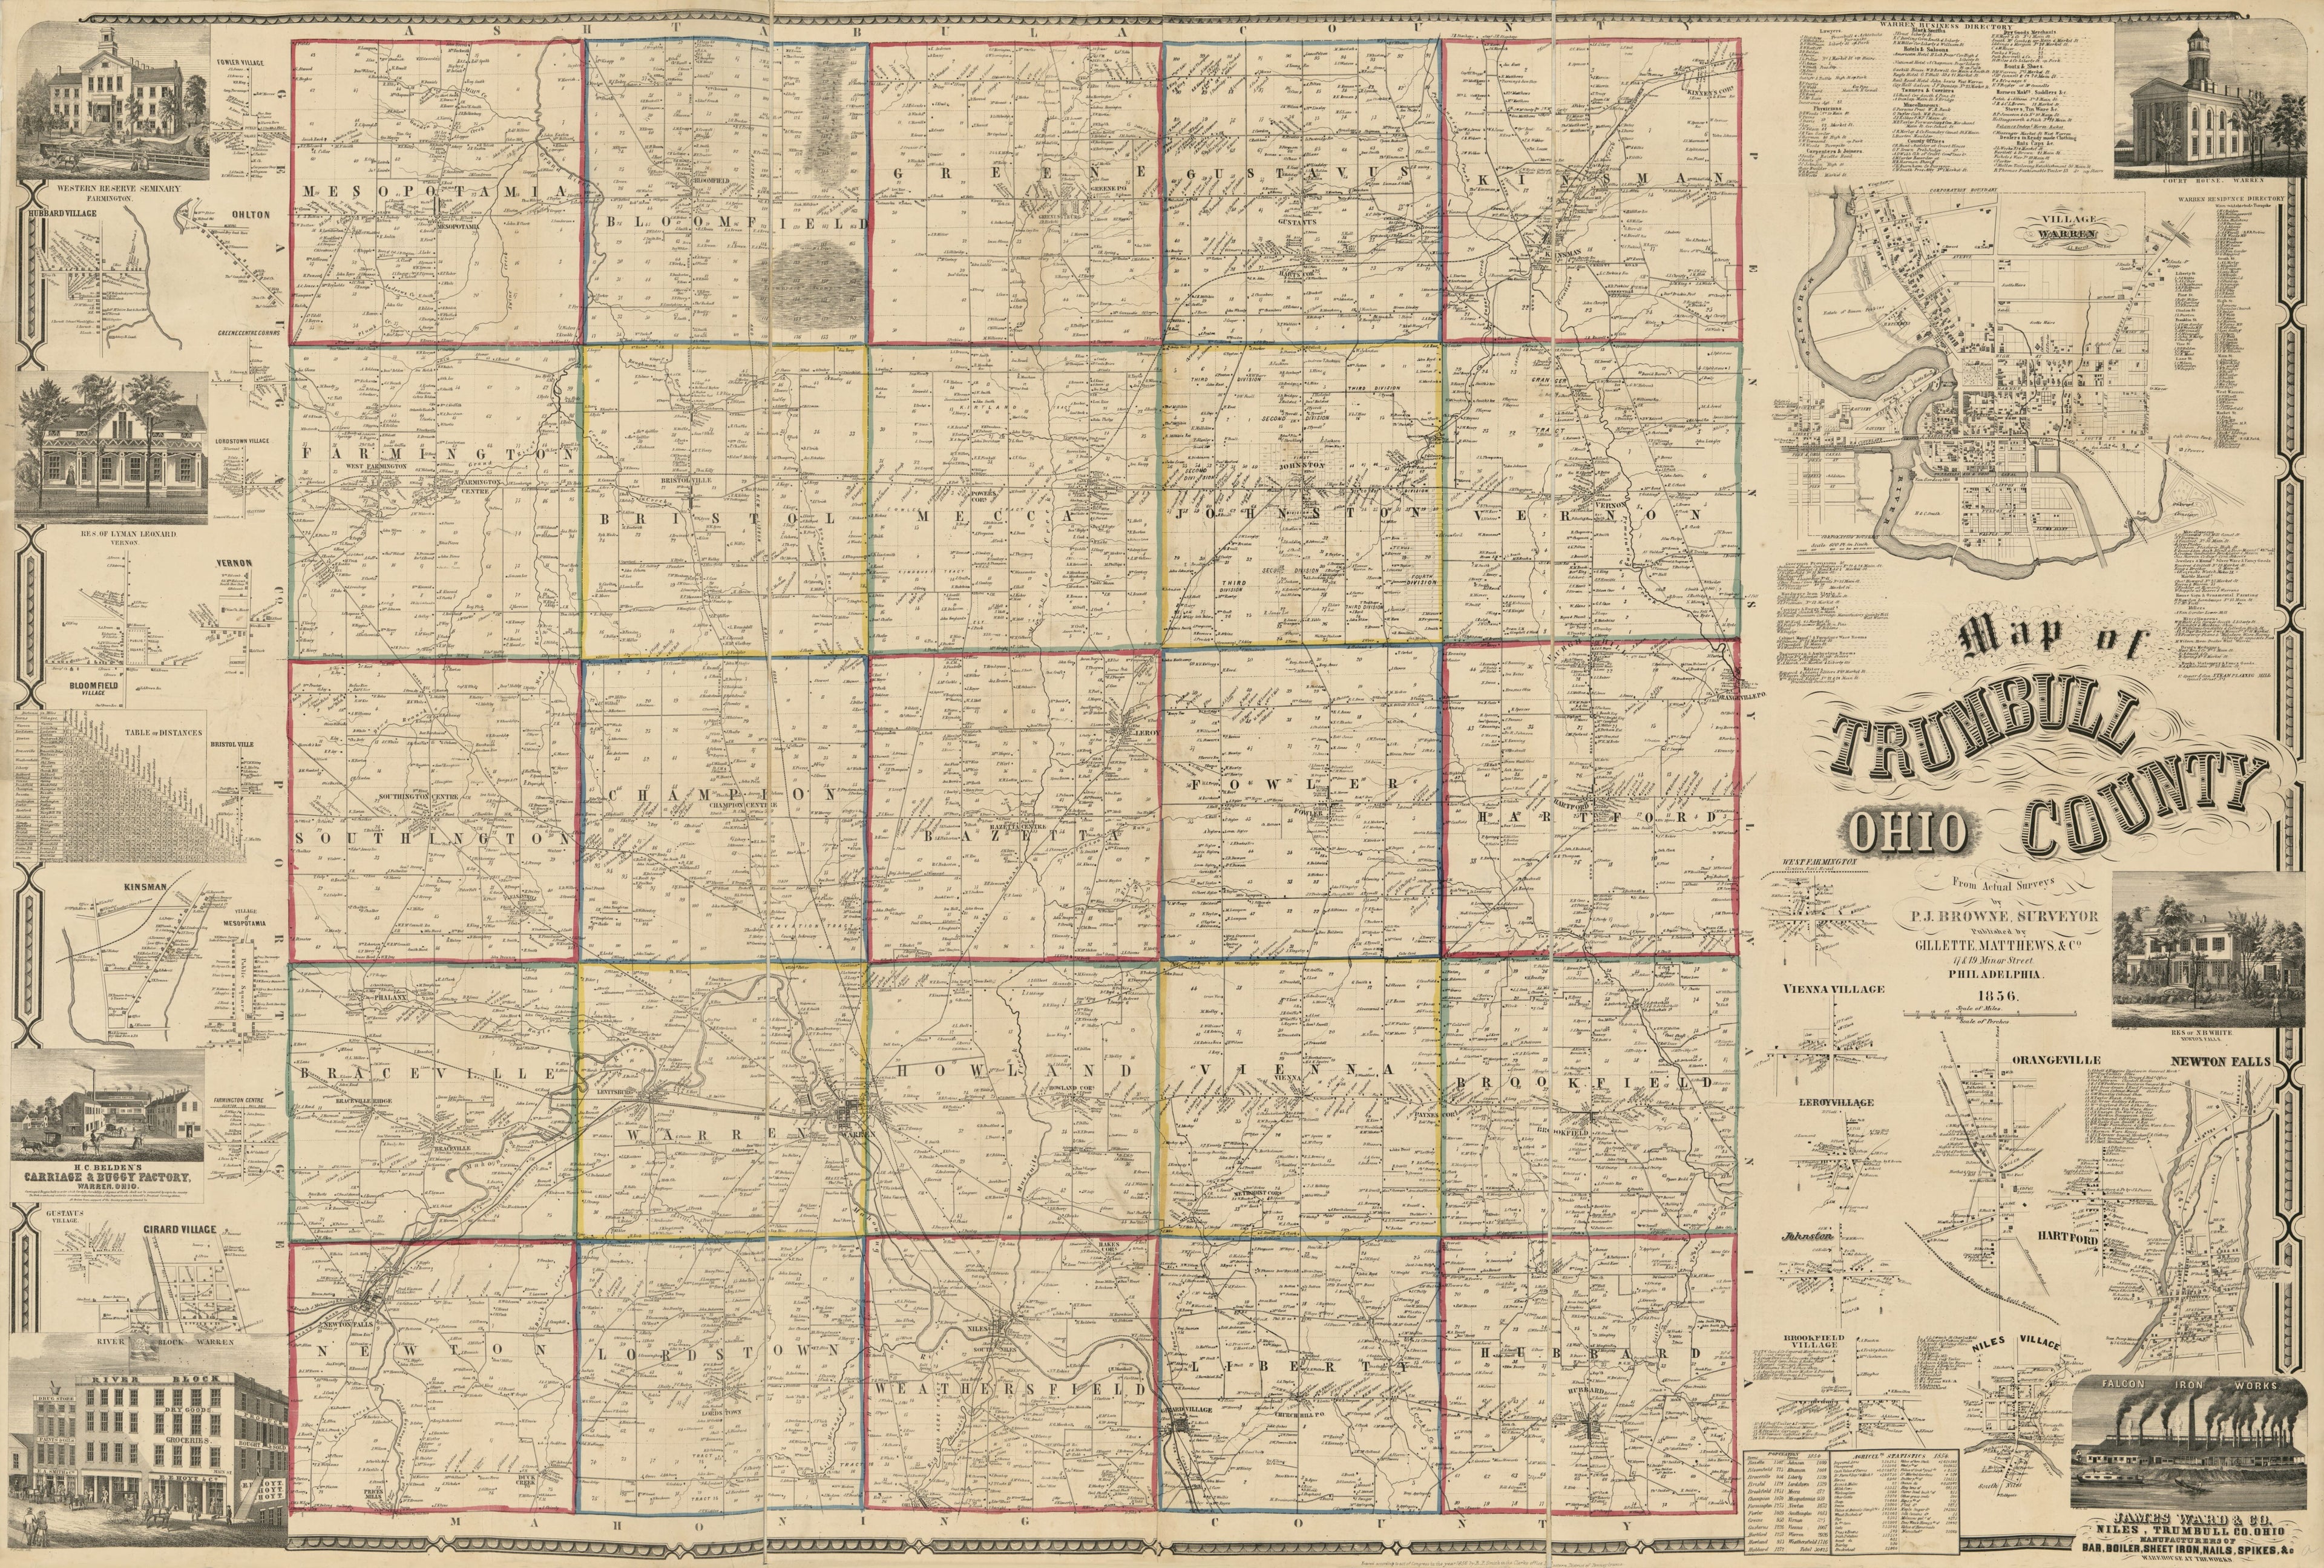 This old map of Map of Trumbull County, Ohio from 1856 was created by P. J. Browne in 1856